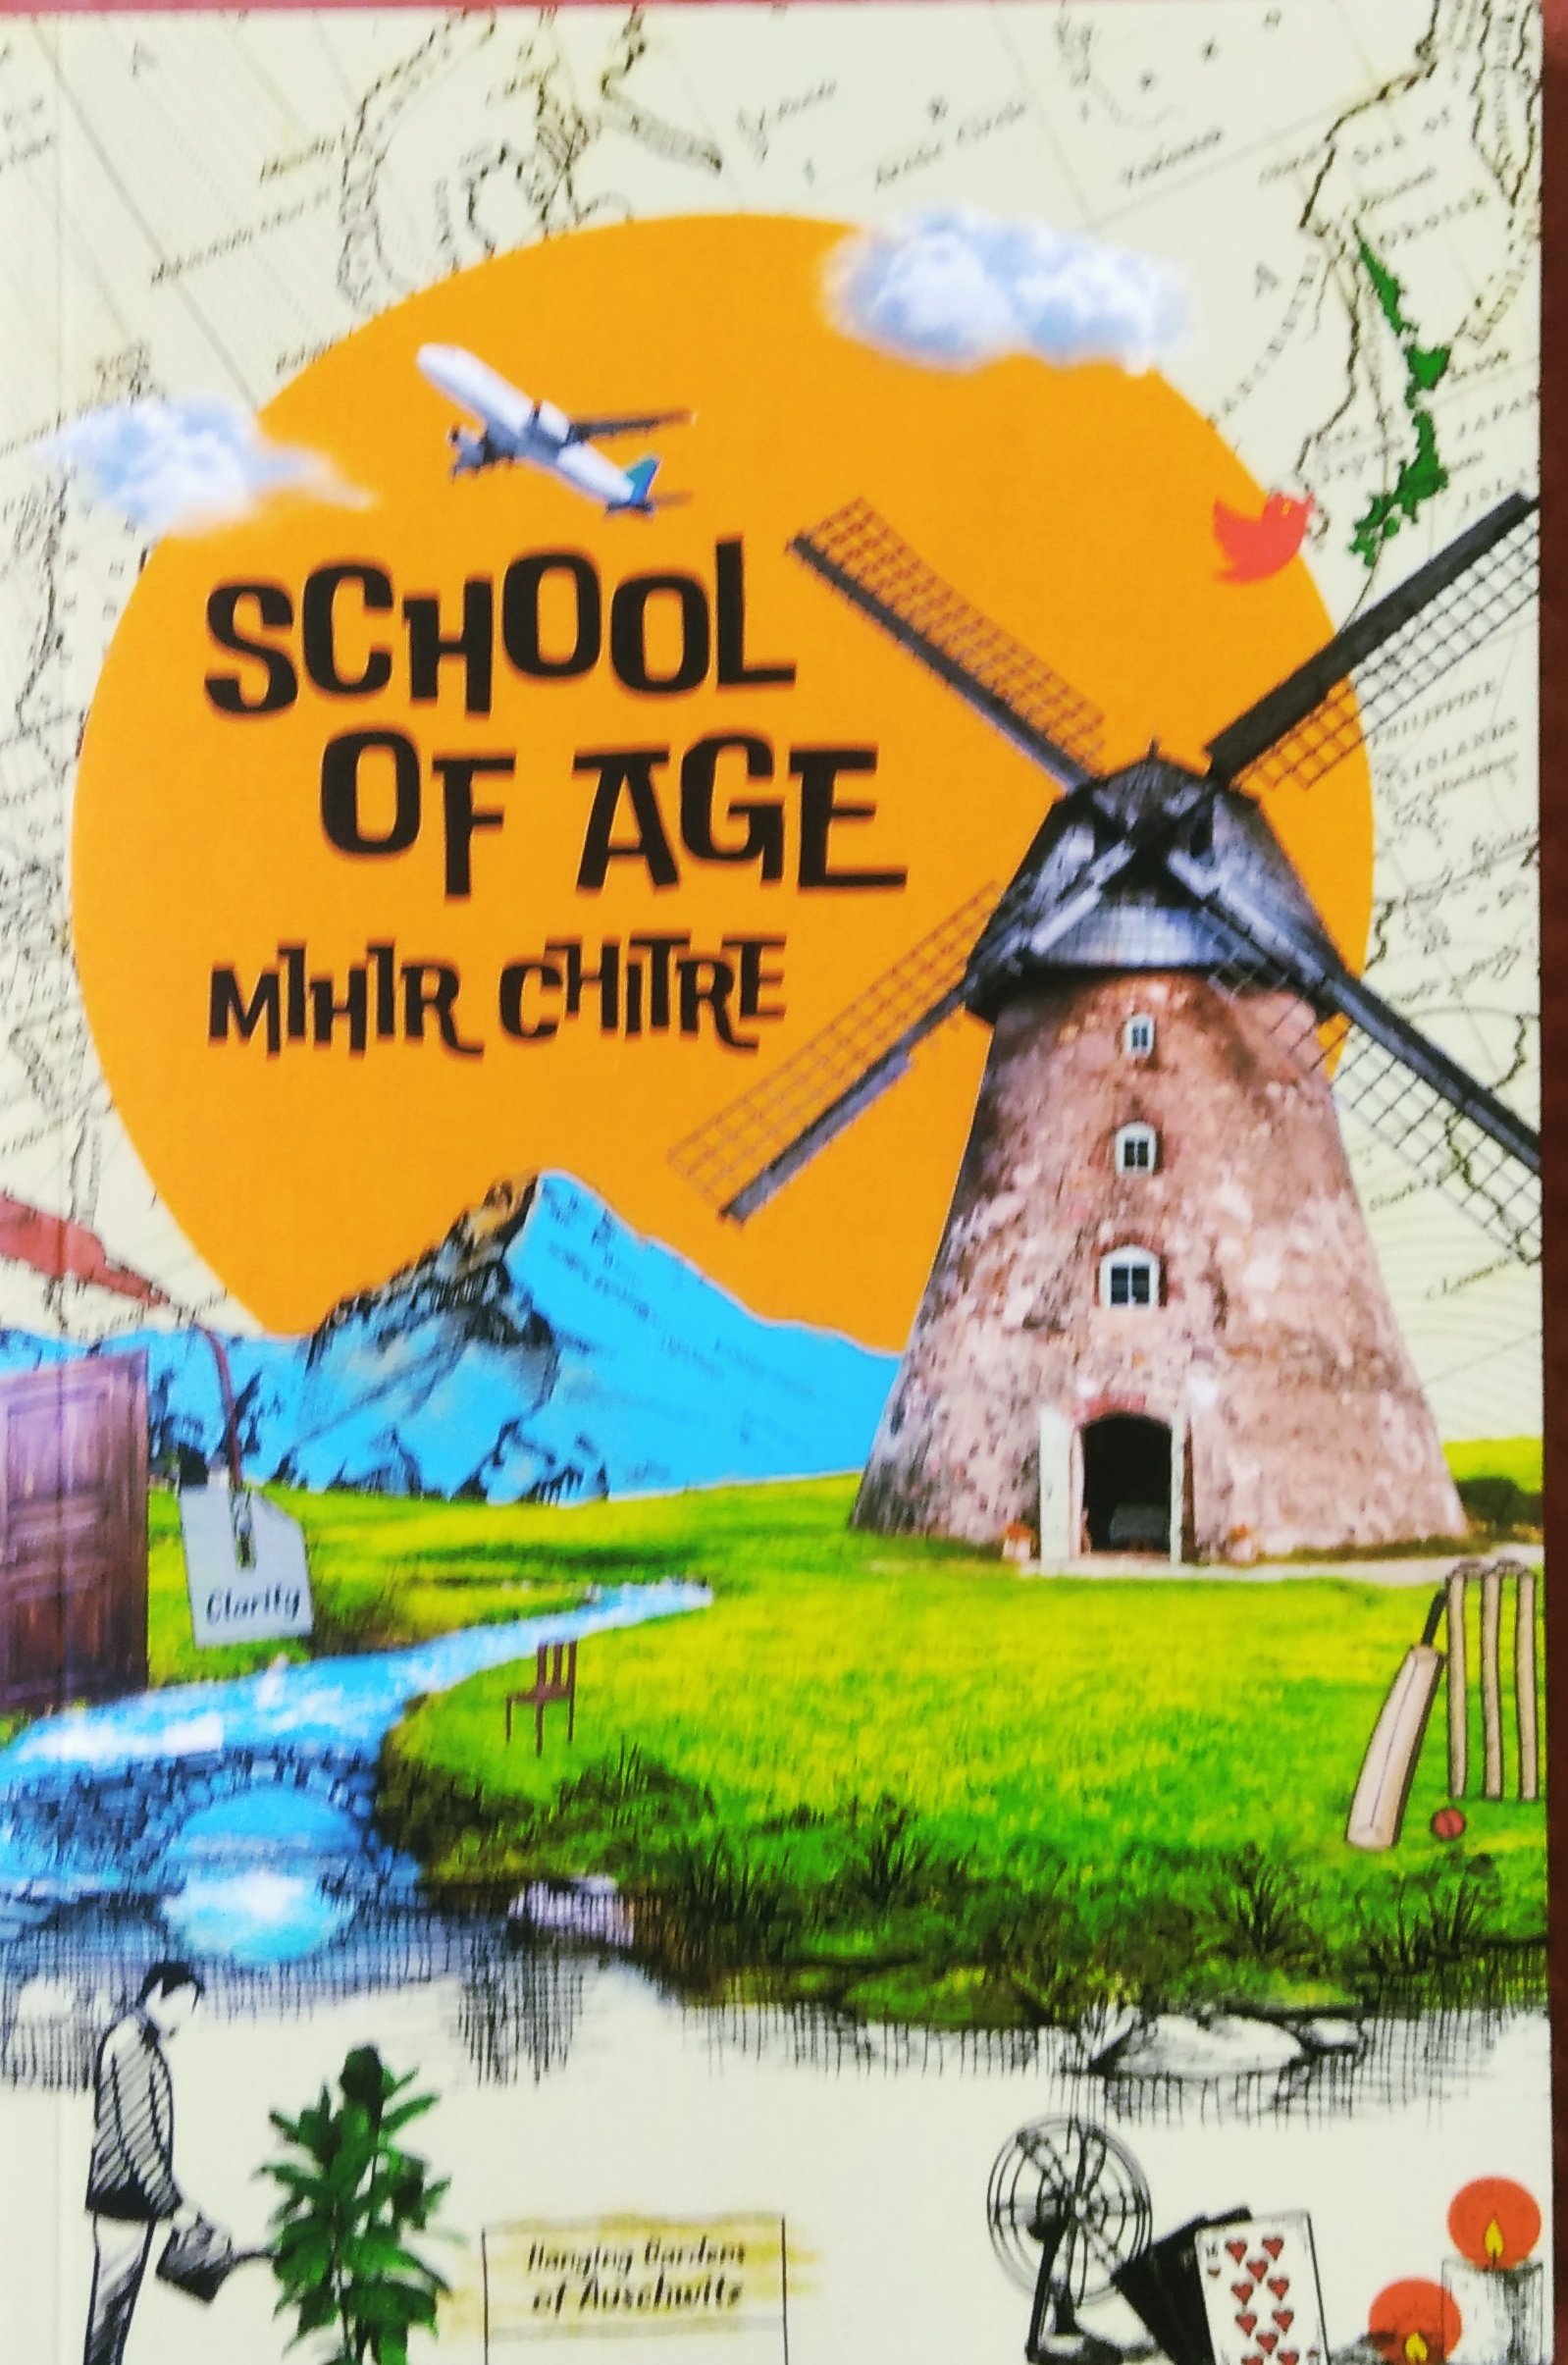 BOOK REVIEW: School of Age